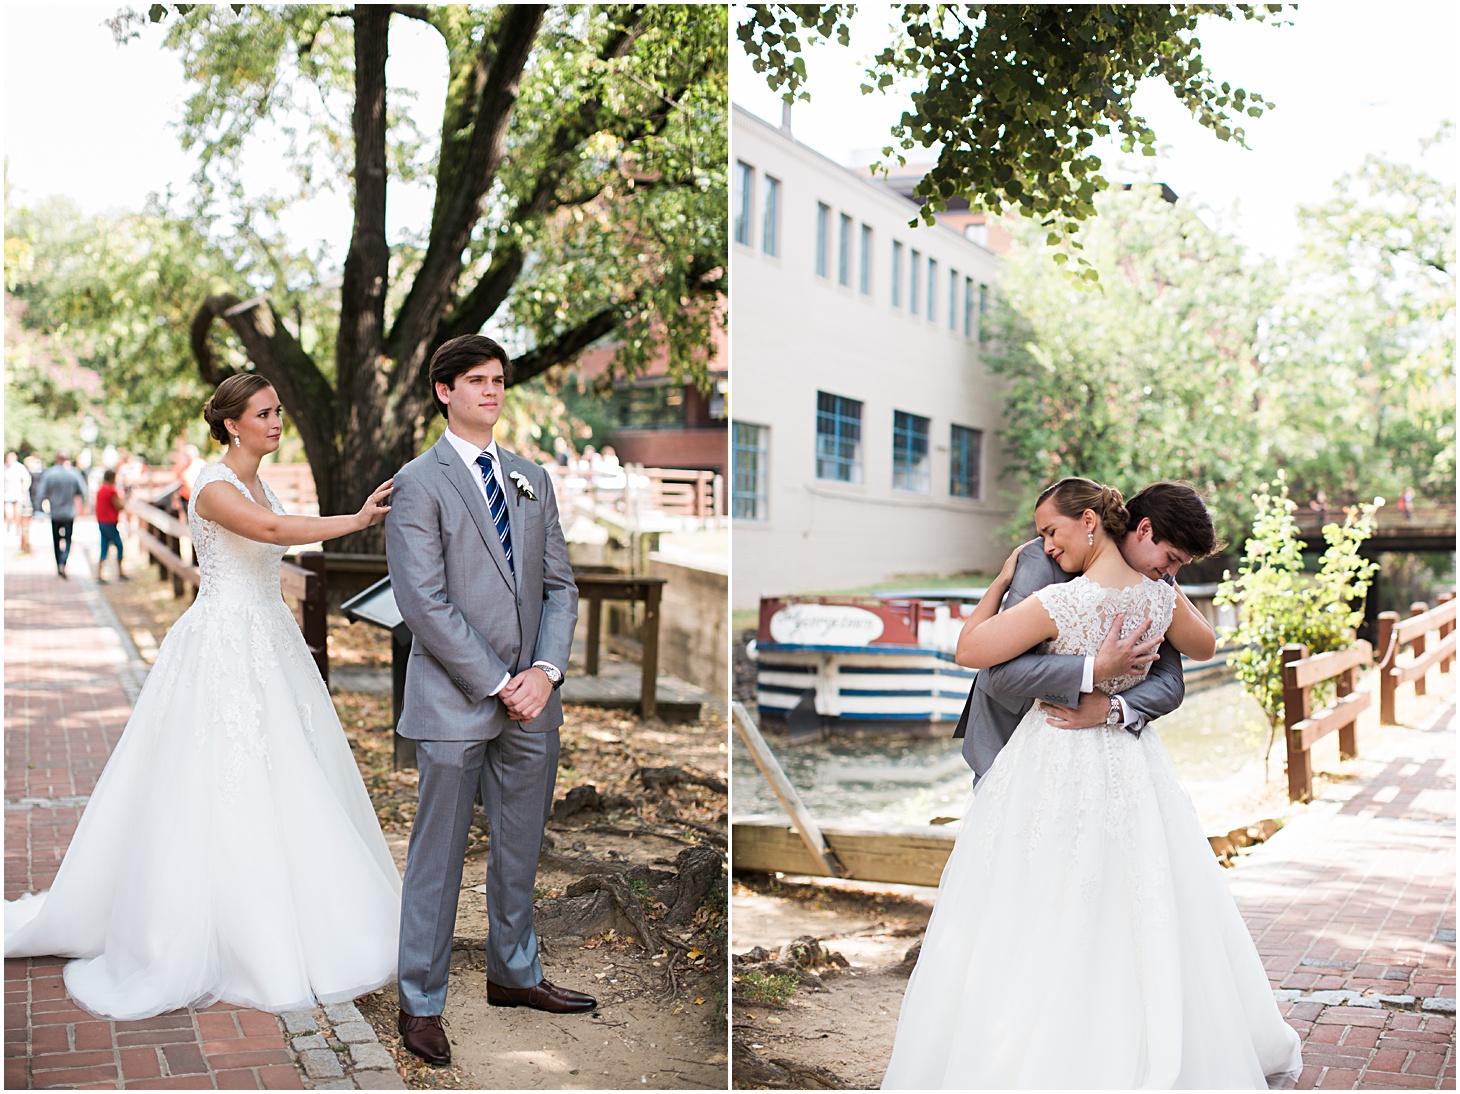 Emotional First Look | Vintage-Inspired Dumbarton House Wedding in Georgetown by Sarah Bradshaw Photography